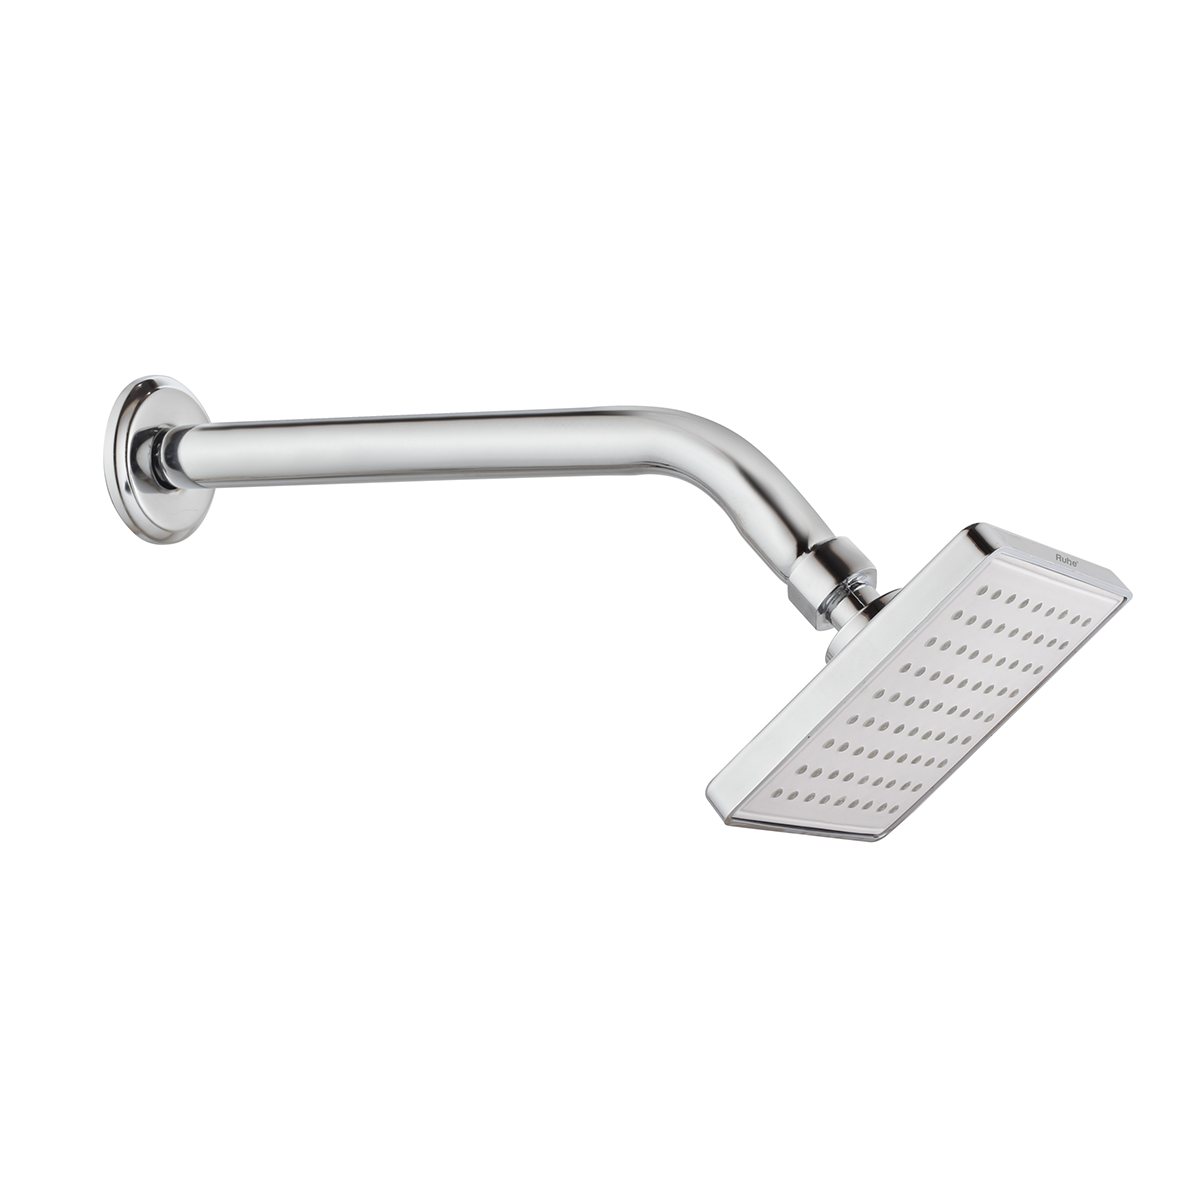 Alpha Overhead Shower (4.5 x 4.5 Inches) with Shower Arm (12 Inches)